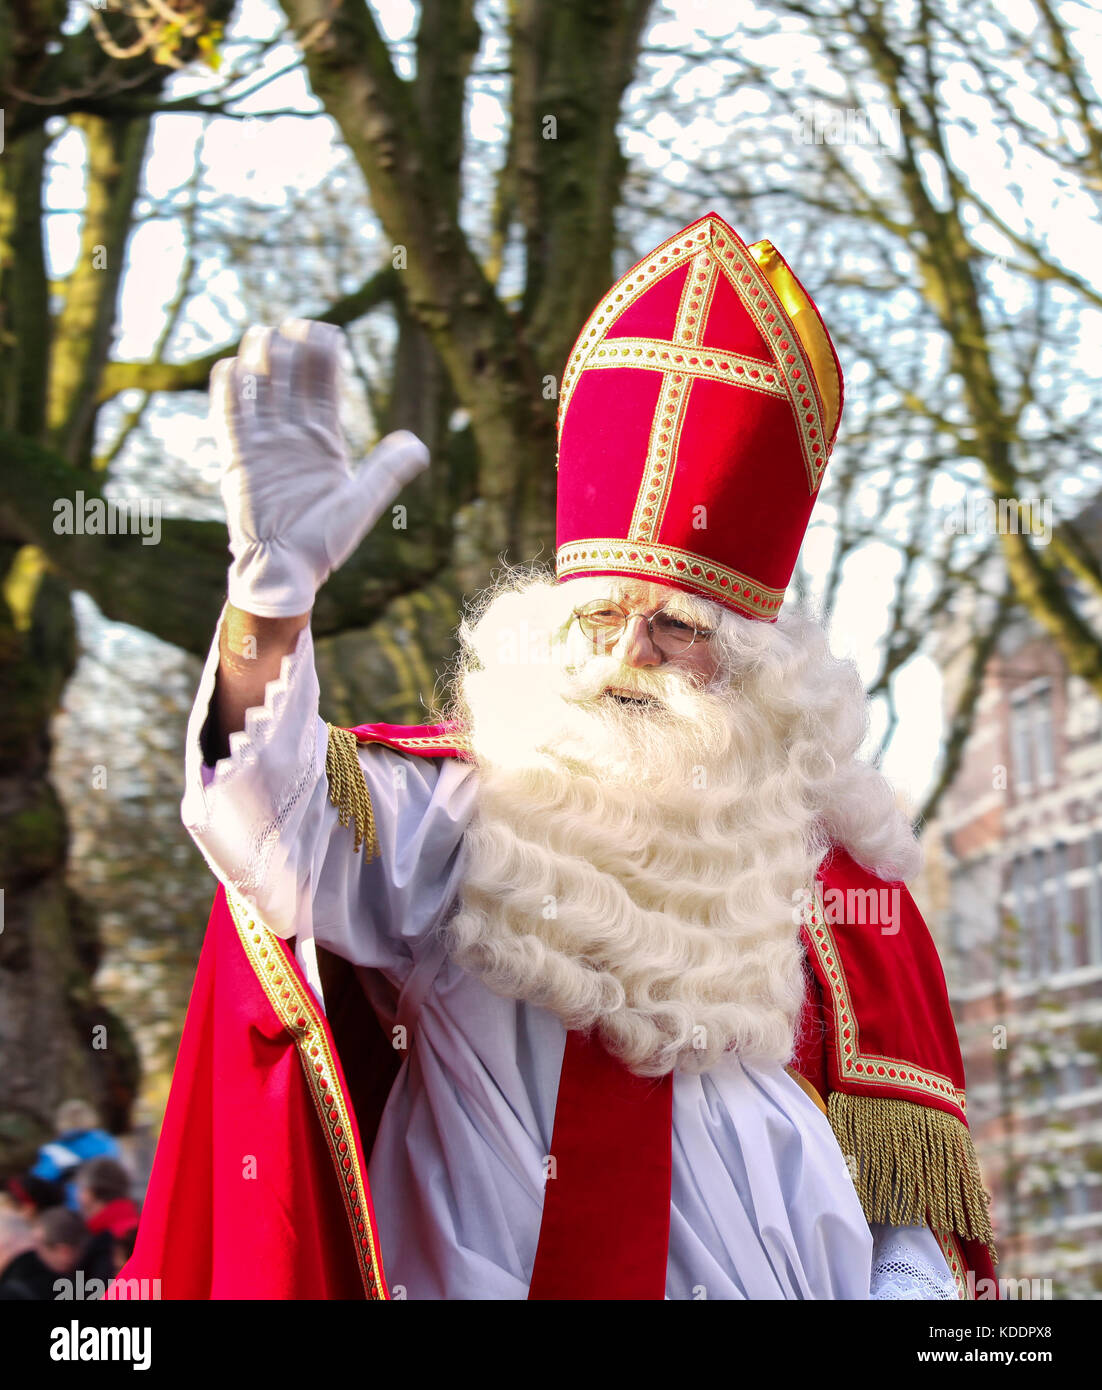 Sinterklaas arriving in the Netherlands on the traditional Dutch holiday on  december 5th Stock Photo - Alamy